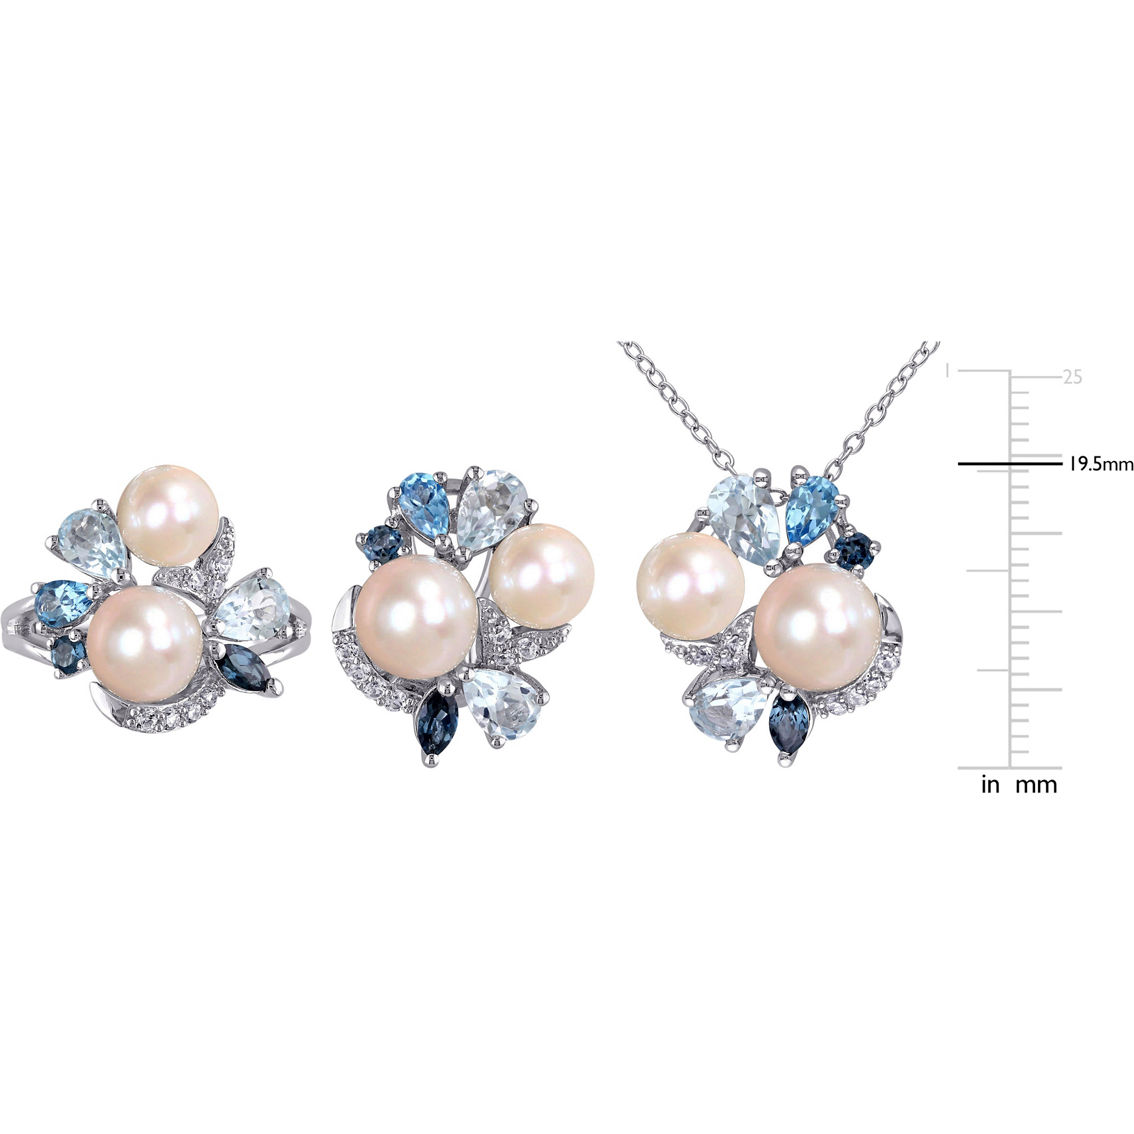 Sofia B. Freshwater Pearl Blue Topaz Cluster Necklace Earrings & Ring 3 pc. Set - Image 6 of 6